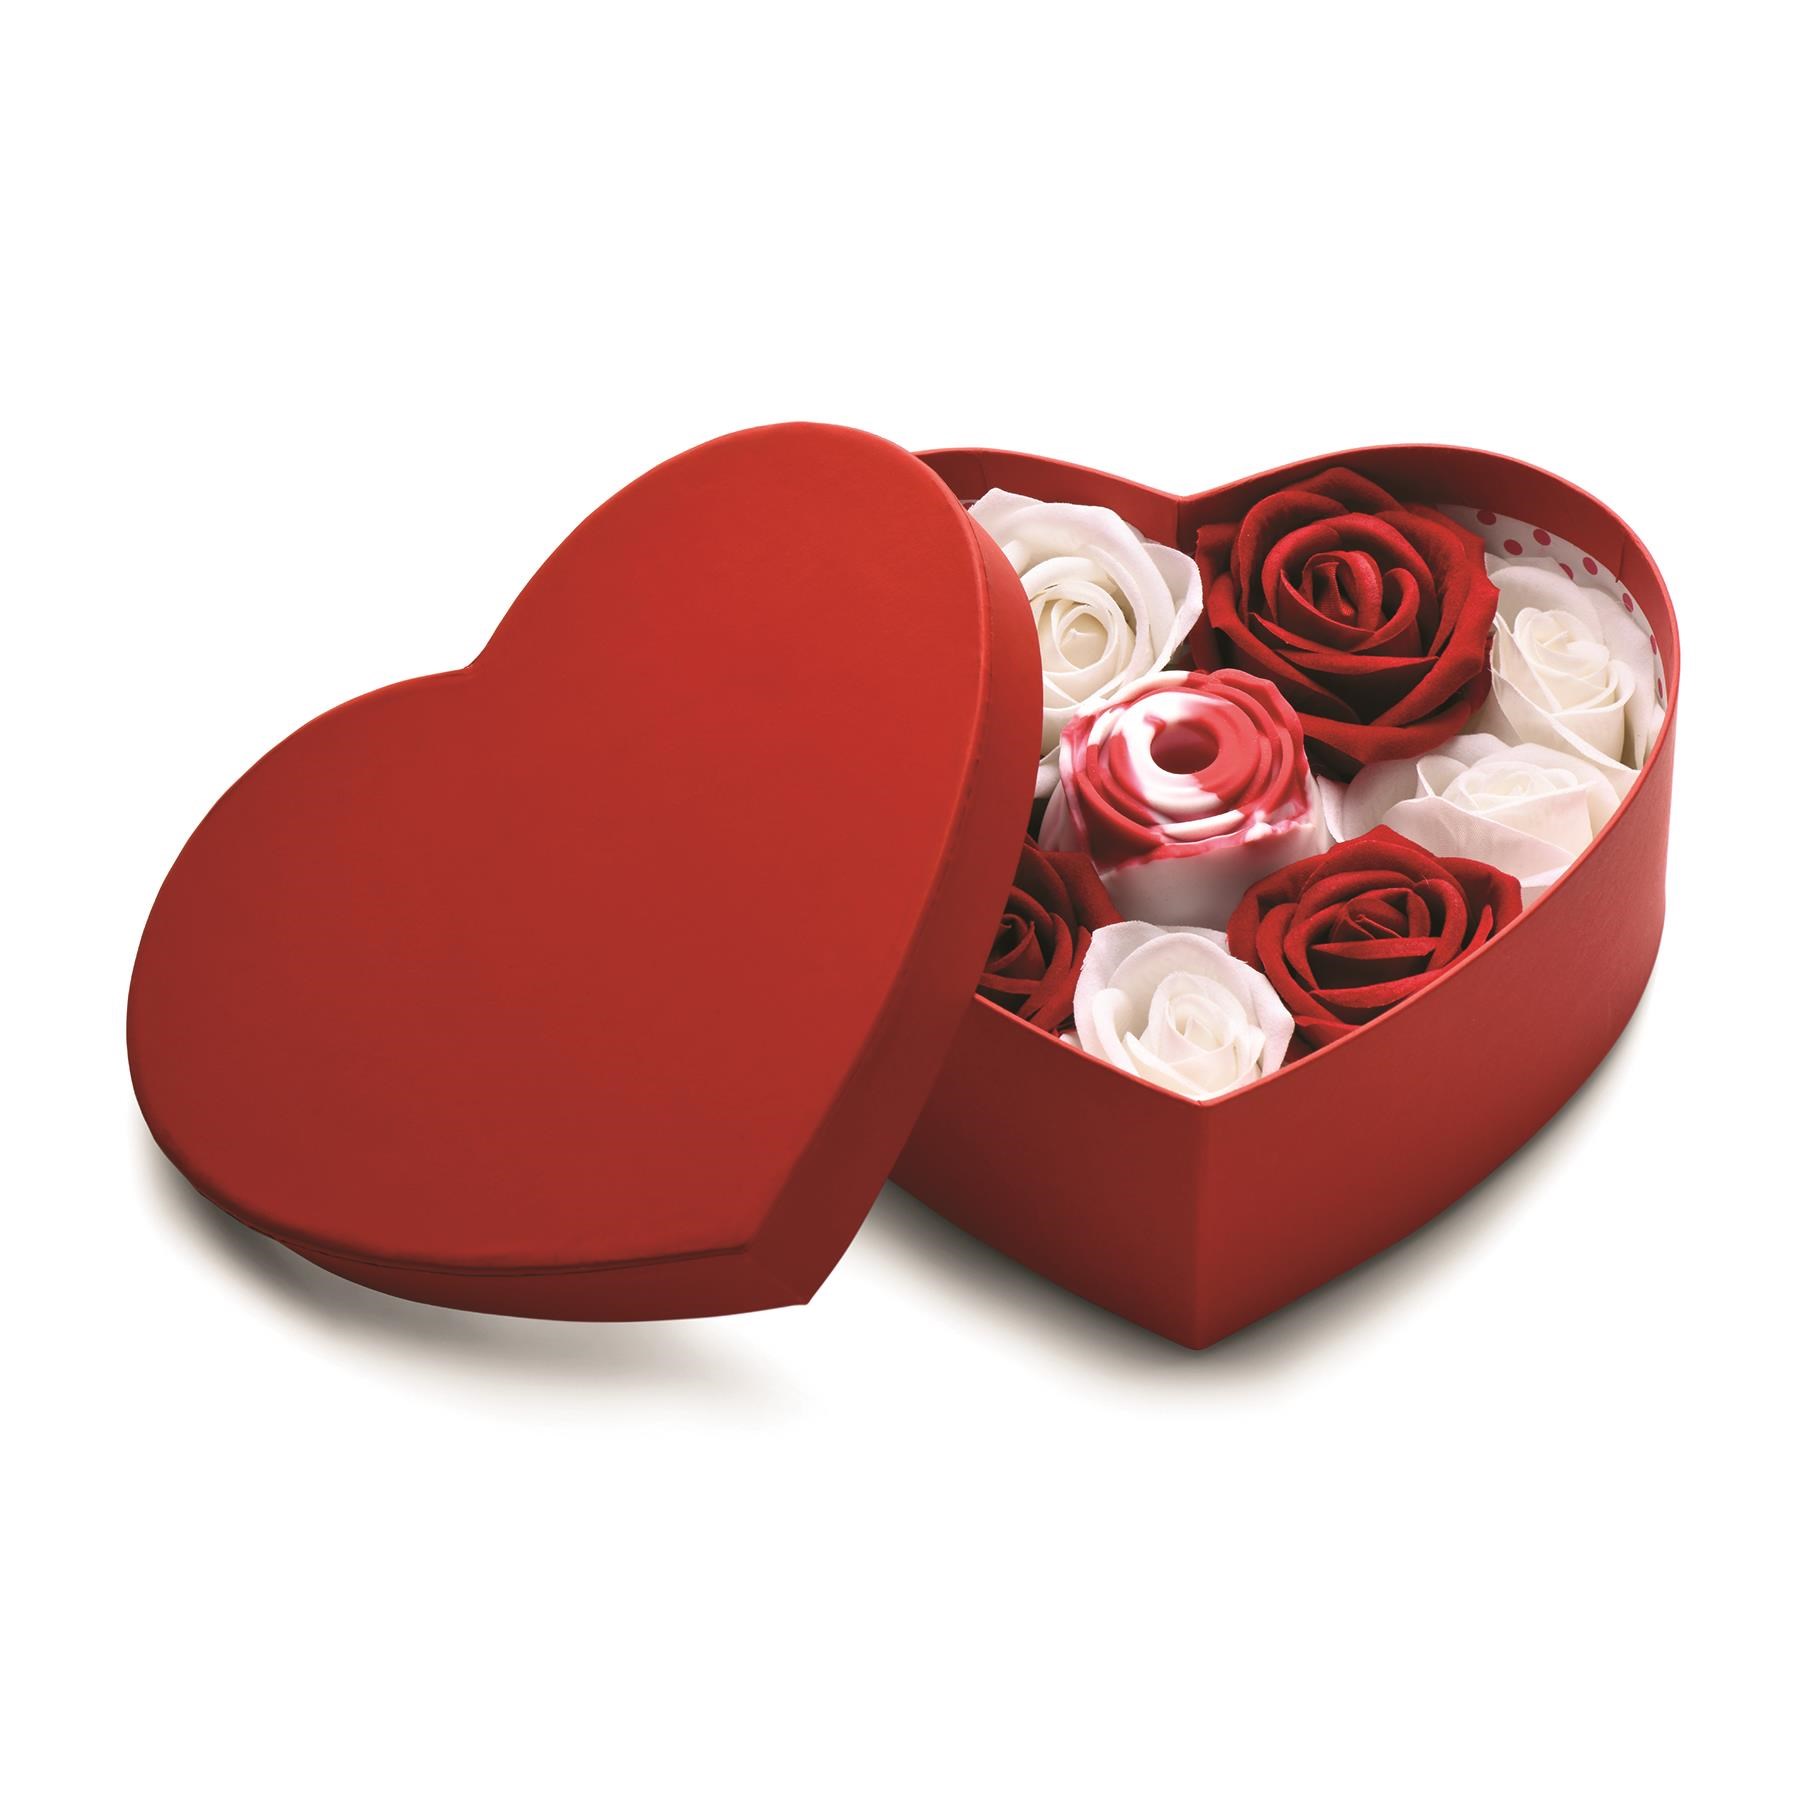 Bloomgasm Rose Lover's Heart Gift Box - Open Box With Vibrator and Petals